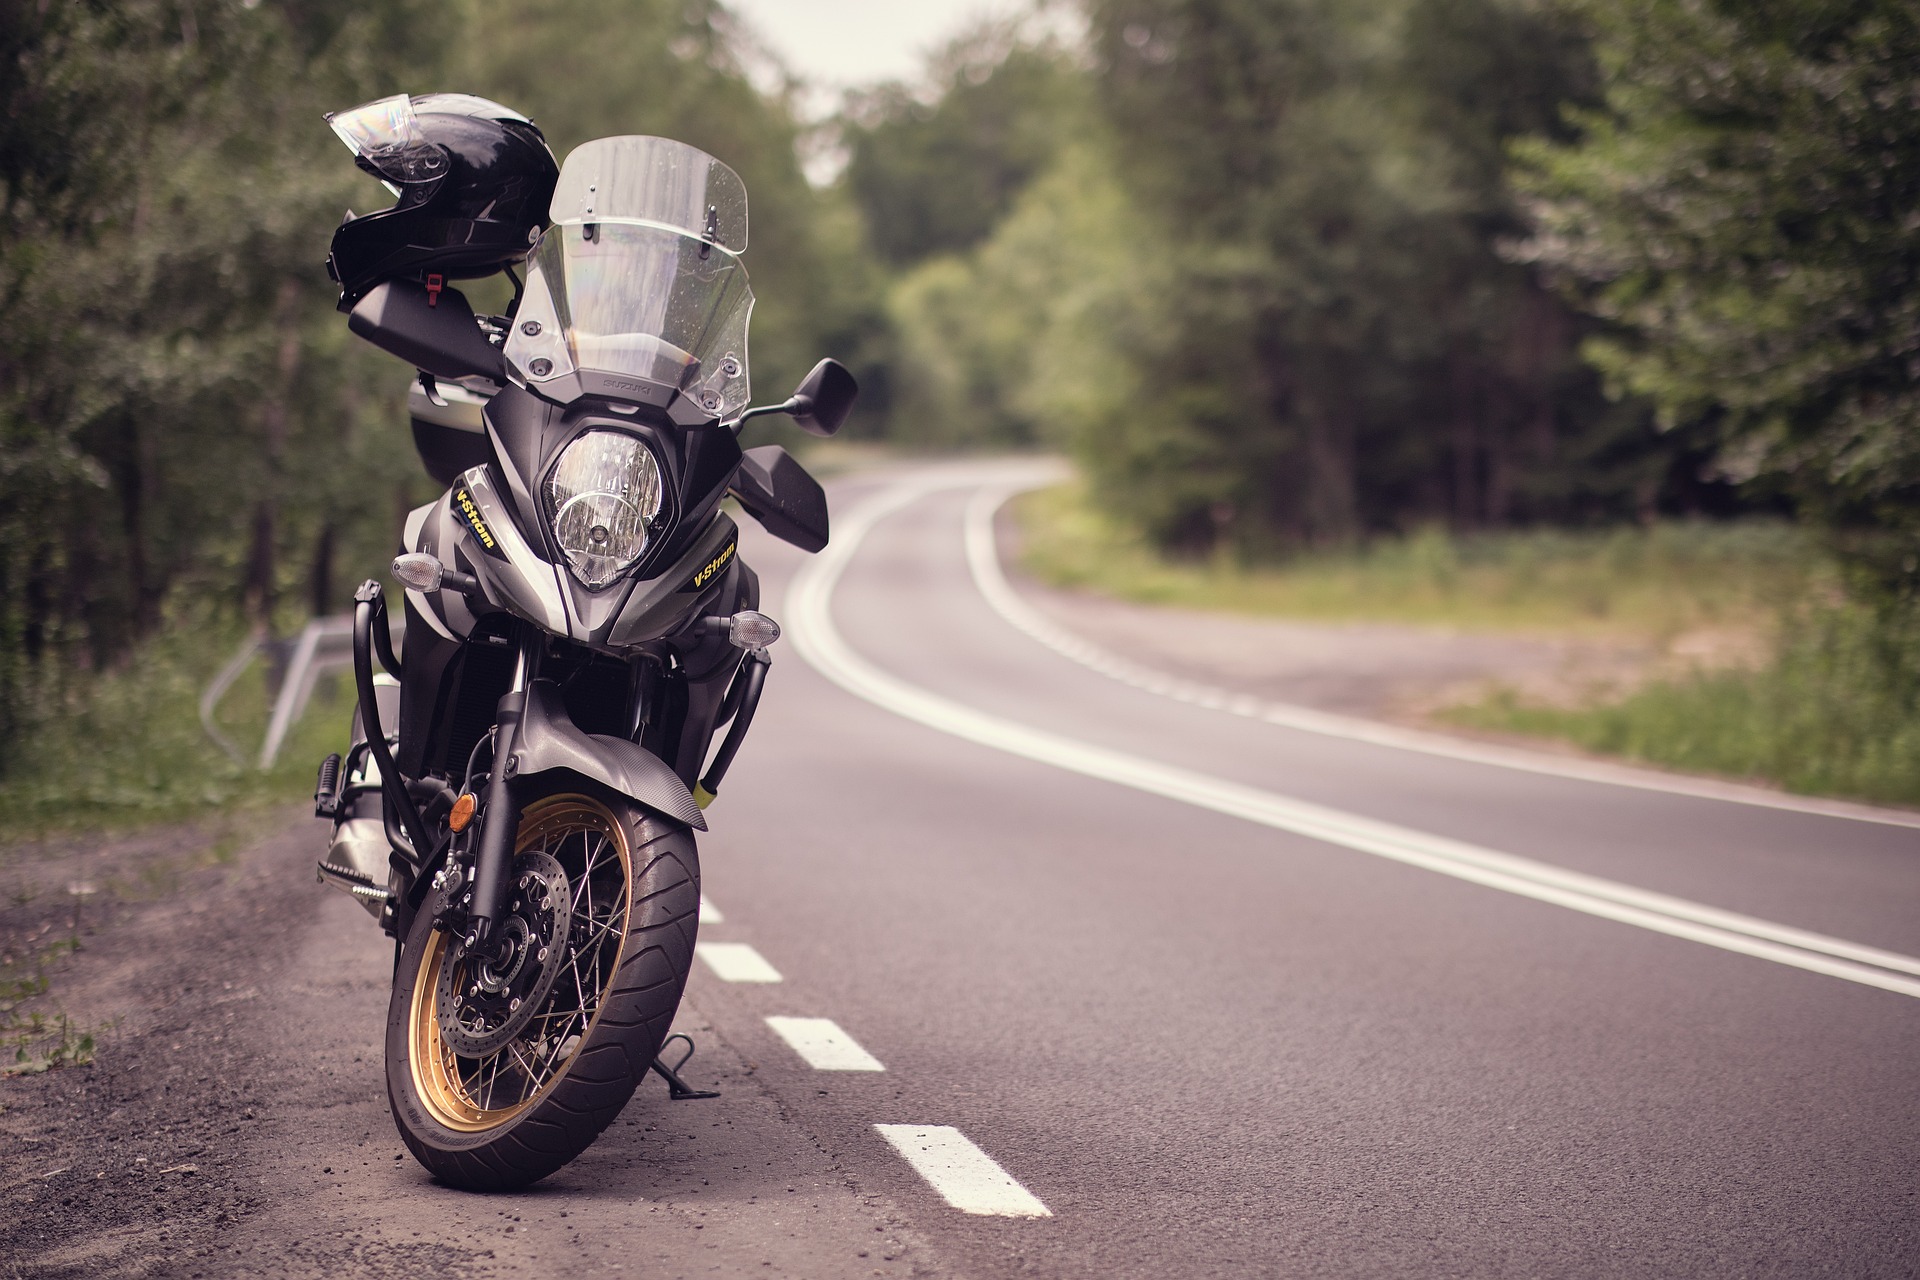 A Motorcycle parked on the side of a road, running through a forest; our No Win No Fee Solicitors discuss making an injury compensation claim if you are a motorcycle user who has been injured through no fault of your own on the road.